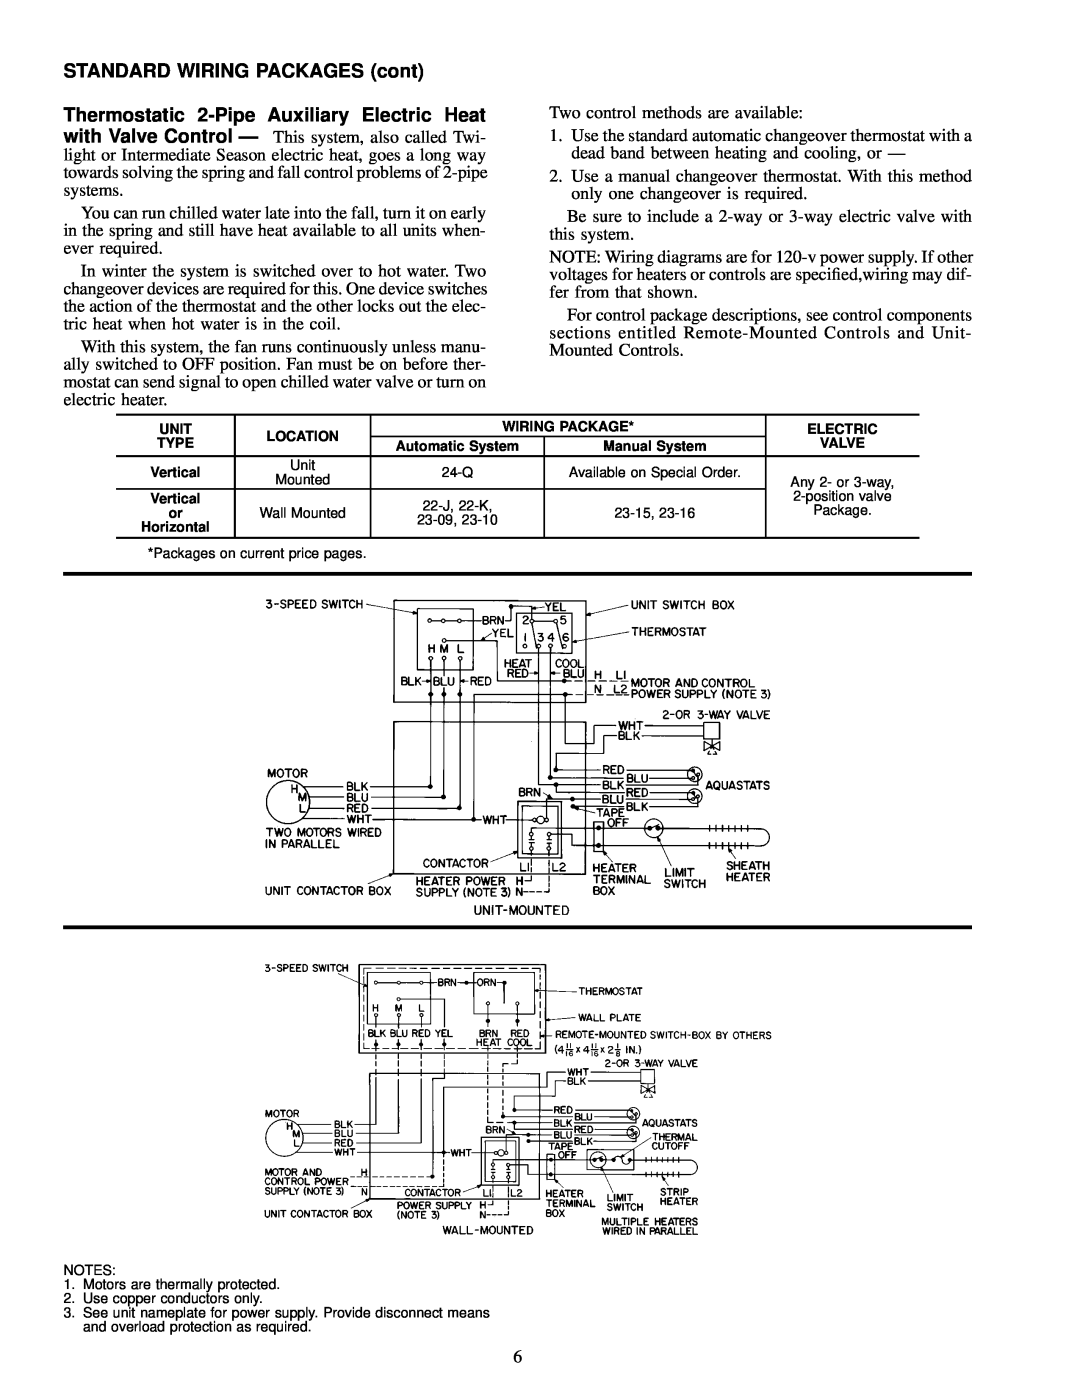 Carrier 42 SERIES specifications STANDARD WIRING PACKAGES cont 